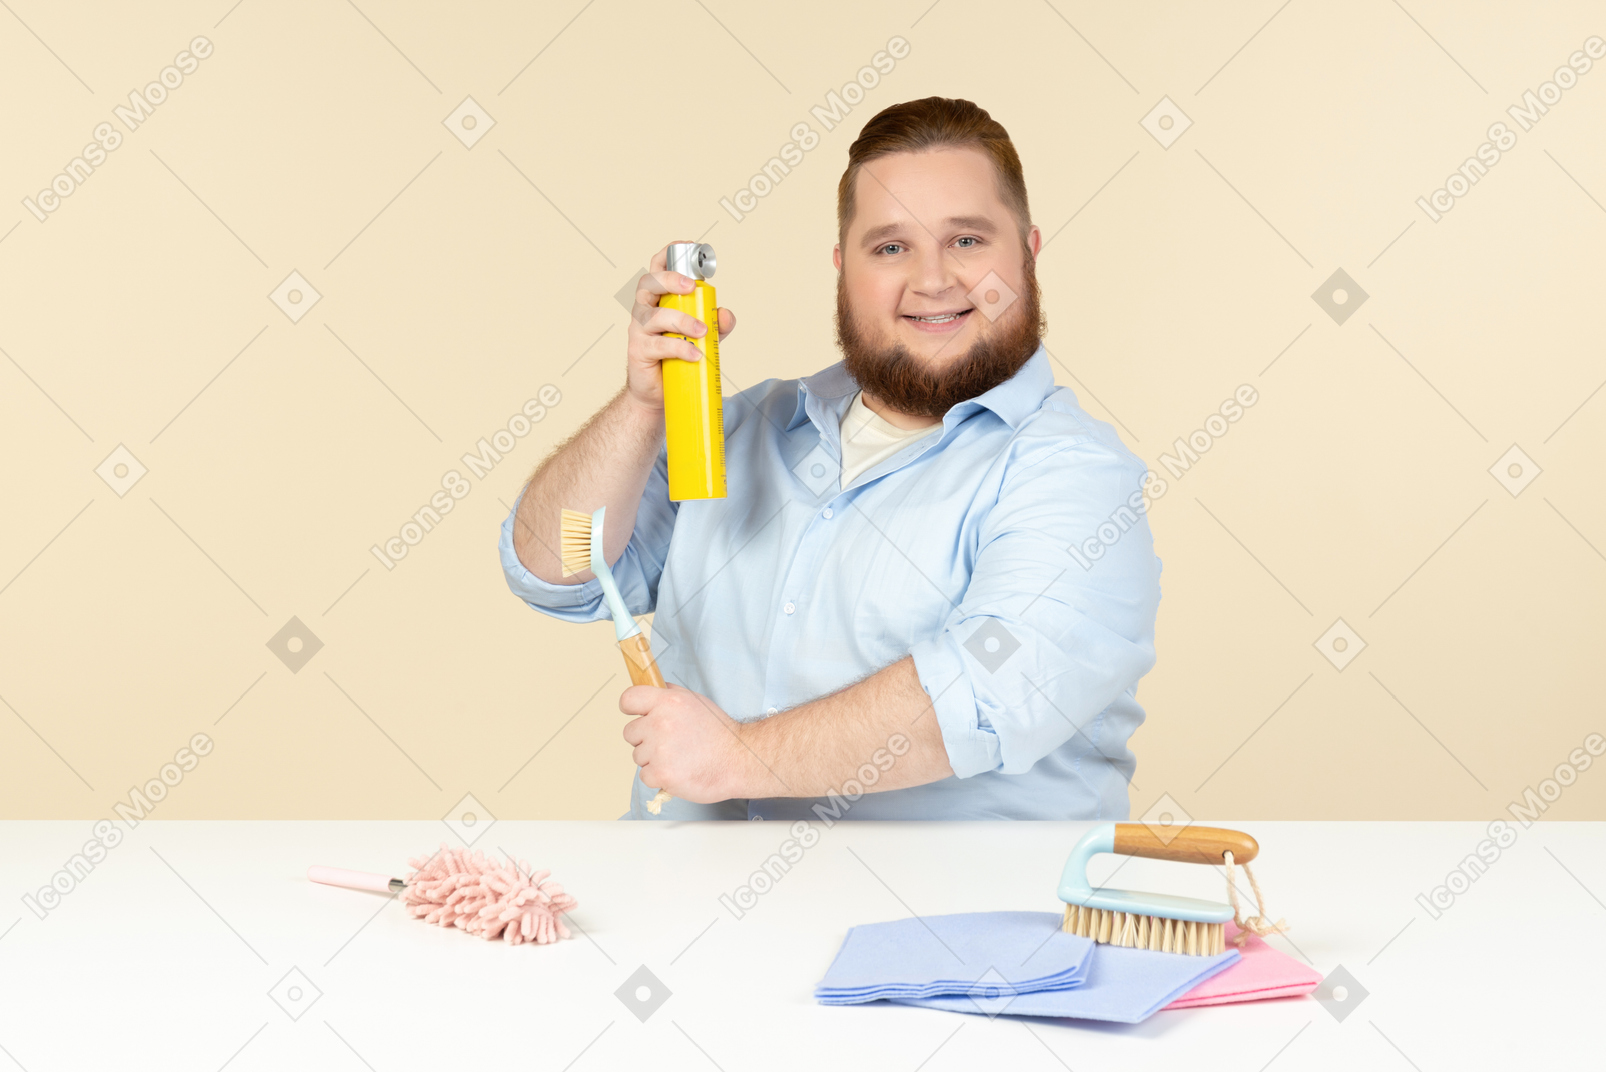 Contented young overweight man sitting at the table and holding cleaning equipment